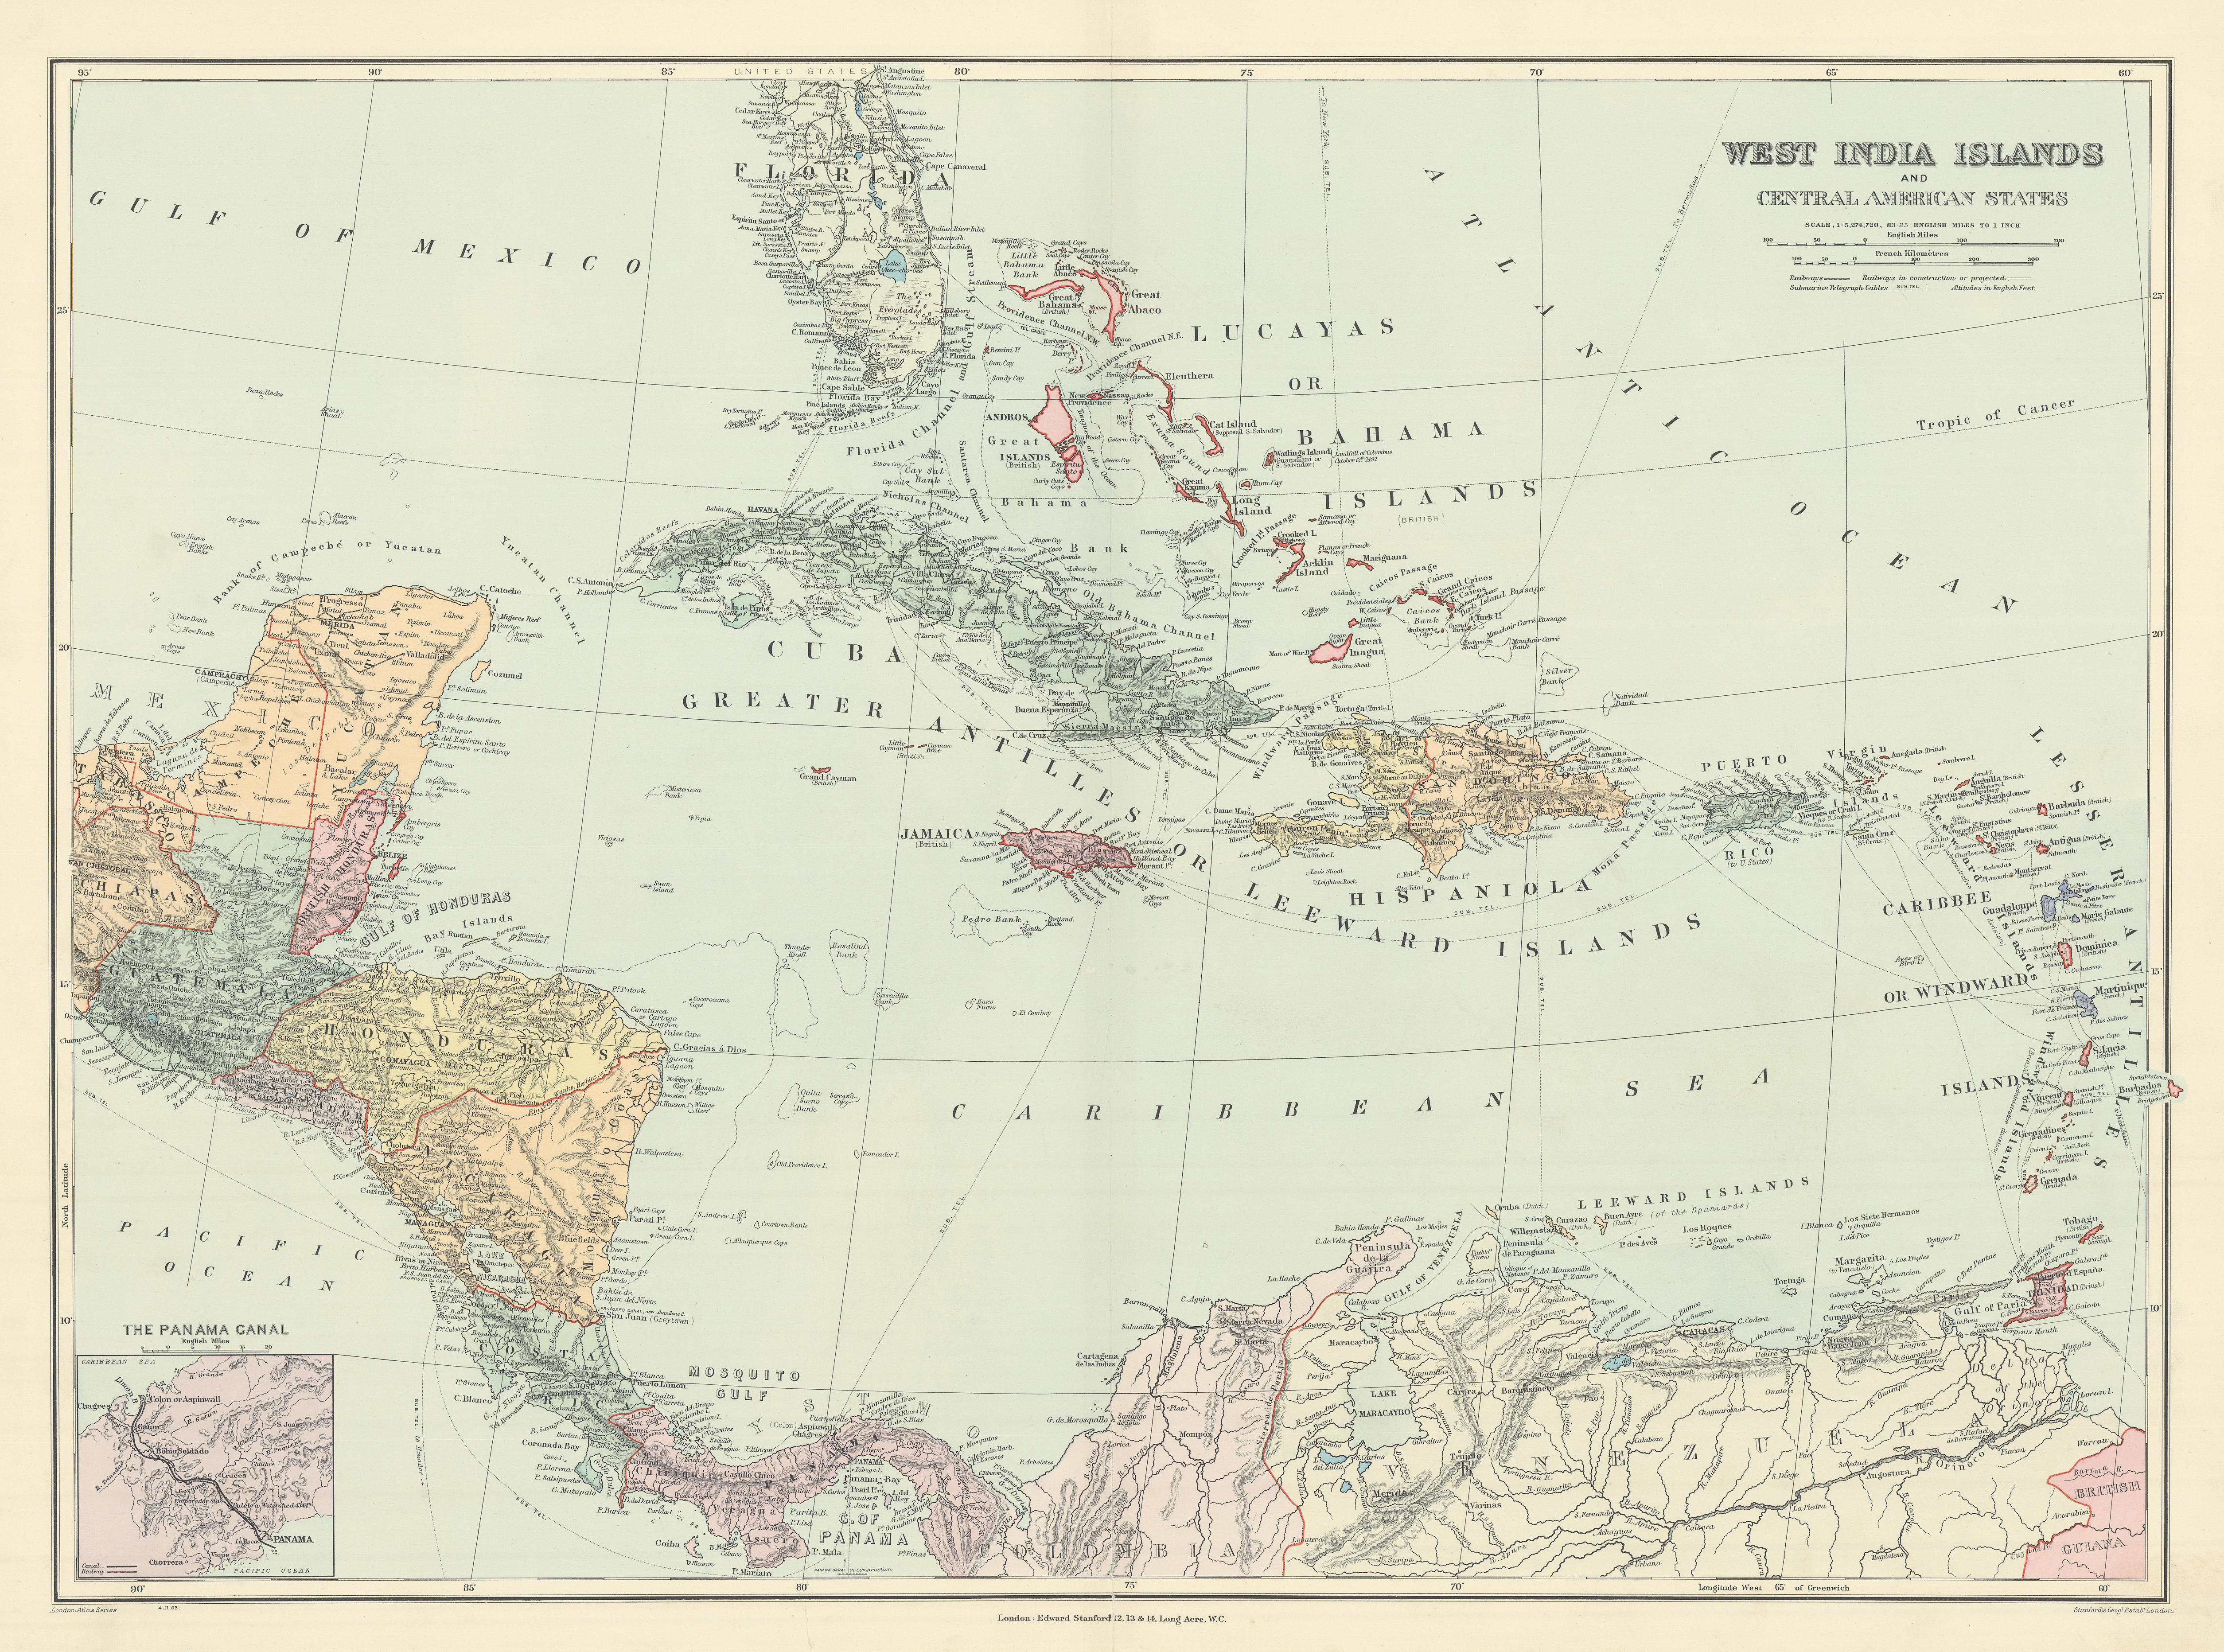 Associate Product West India Islands & Central American States. Caribbean. STANFORD 1904 old map